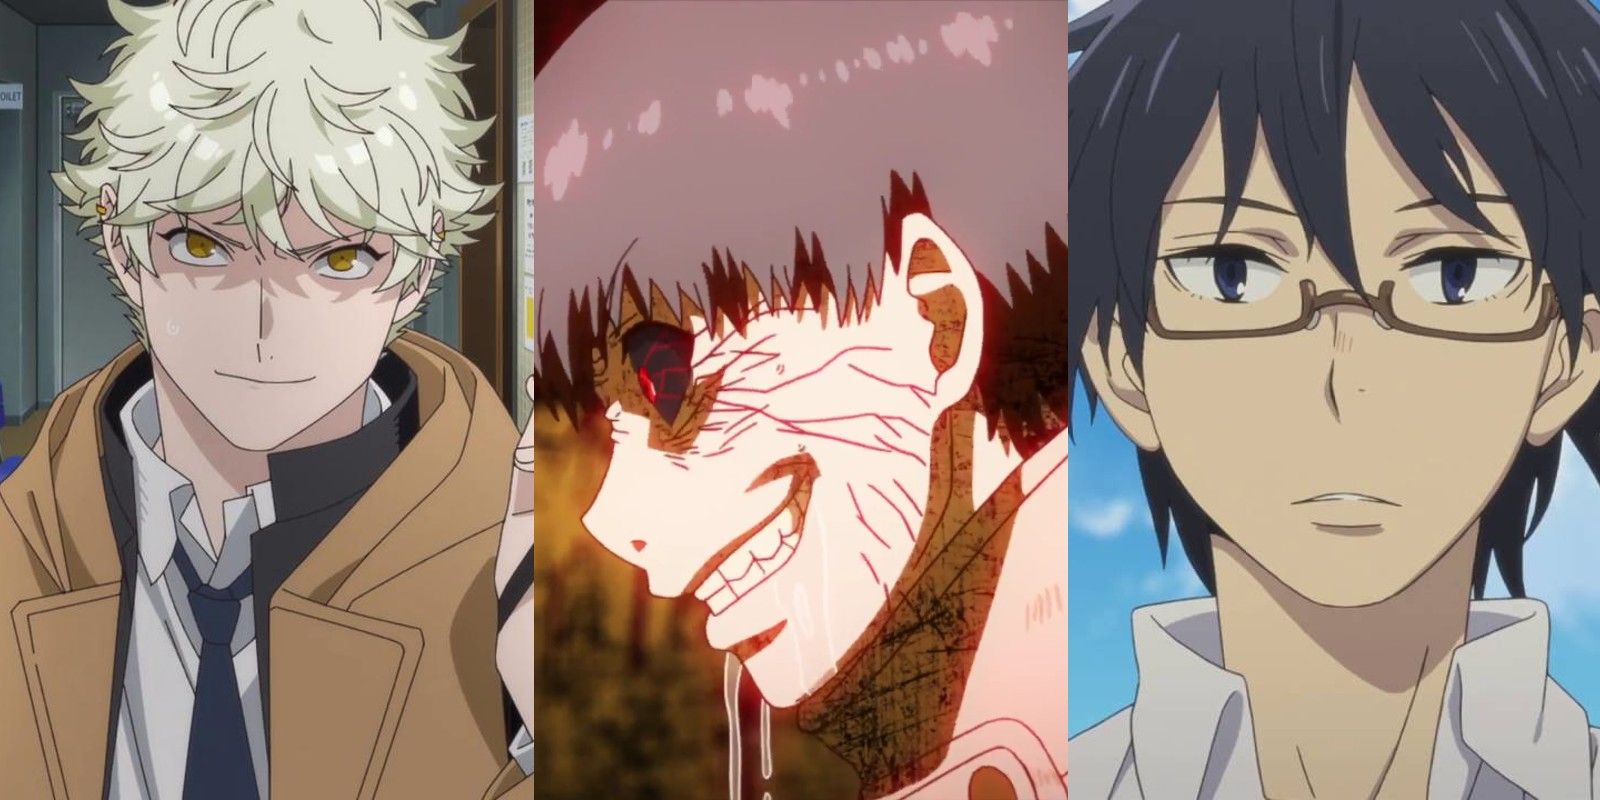 Blue Period, Tokyo Ghoul, and Erased